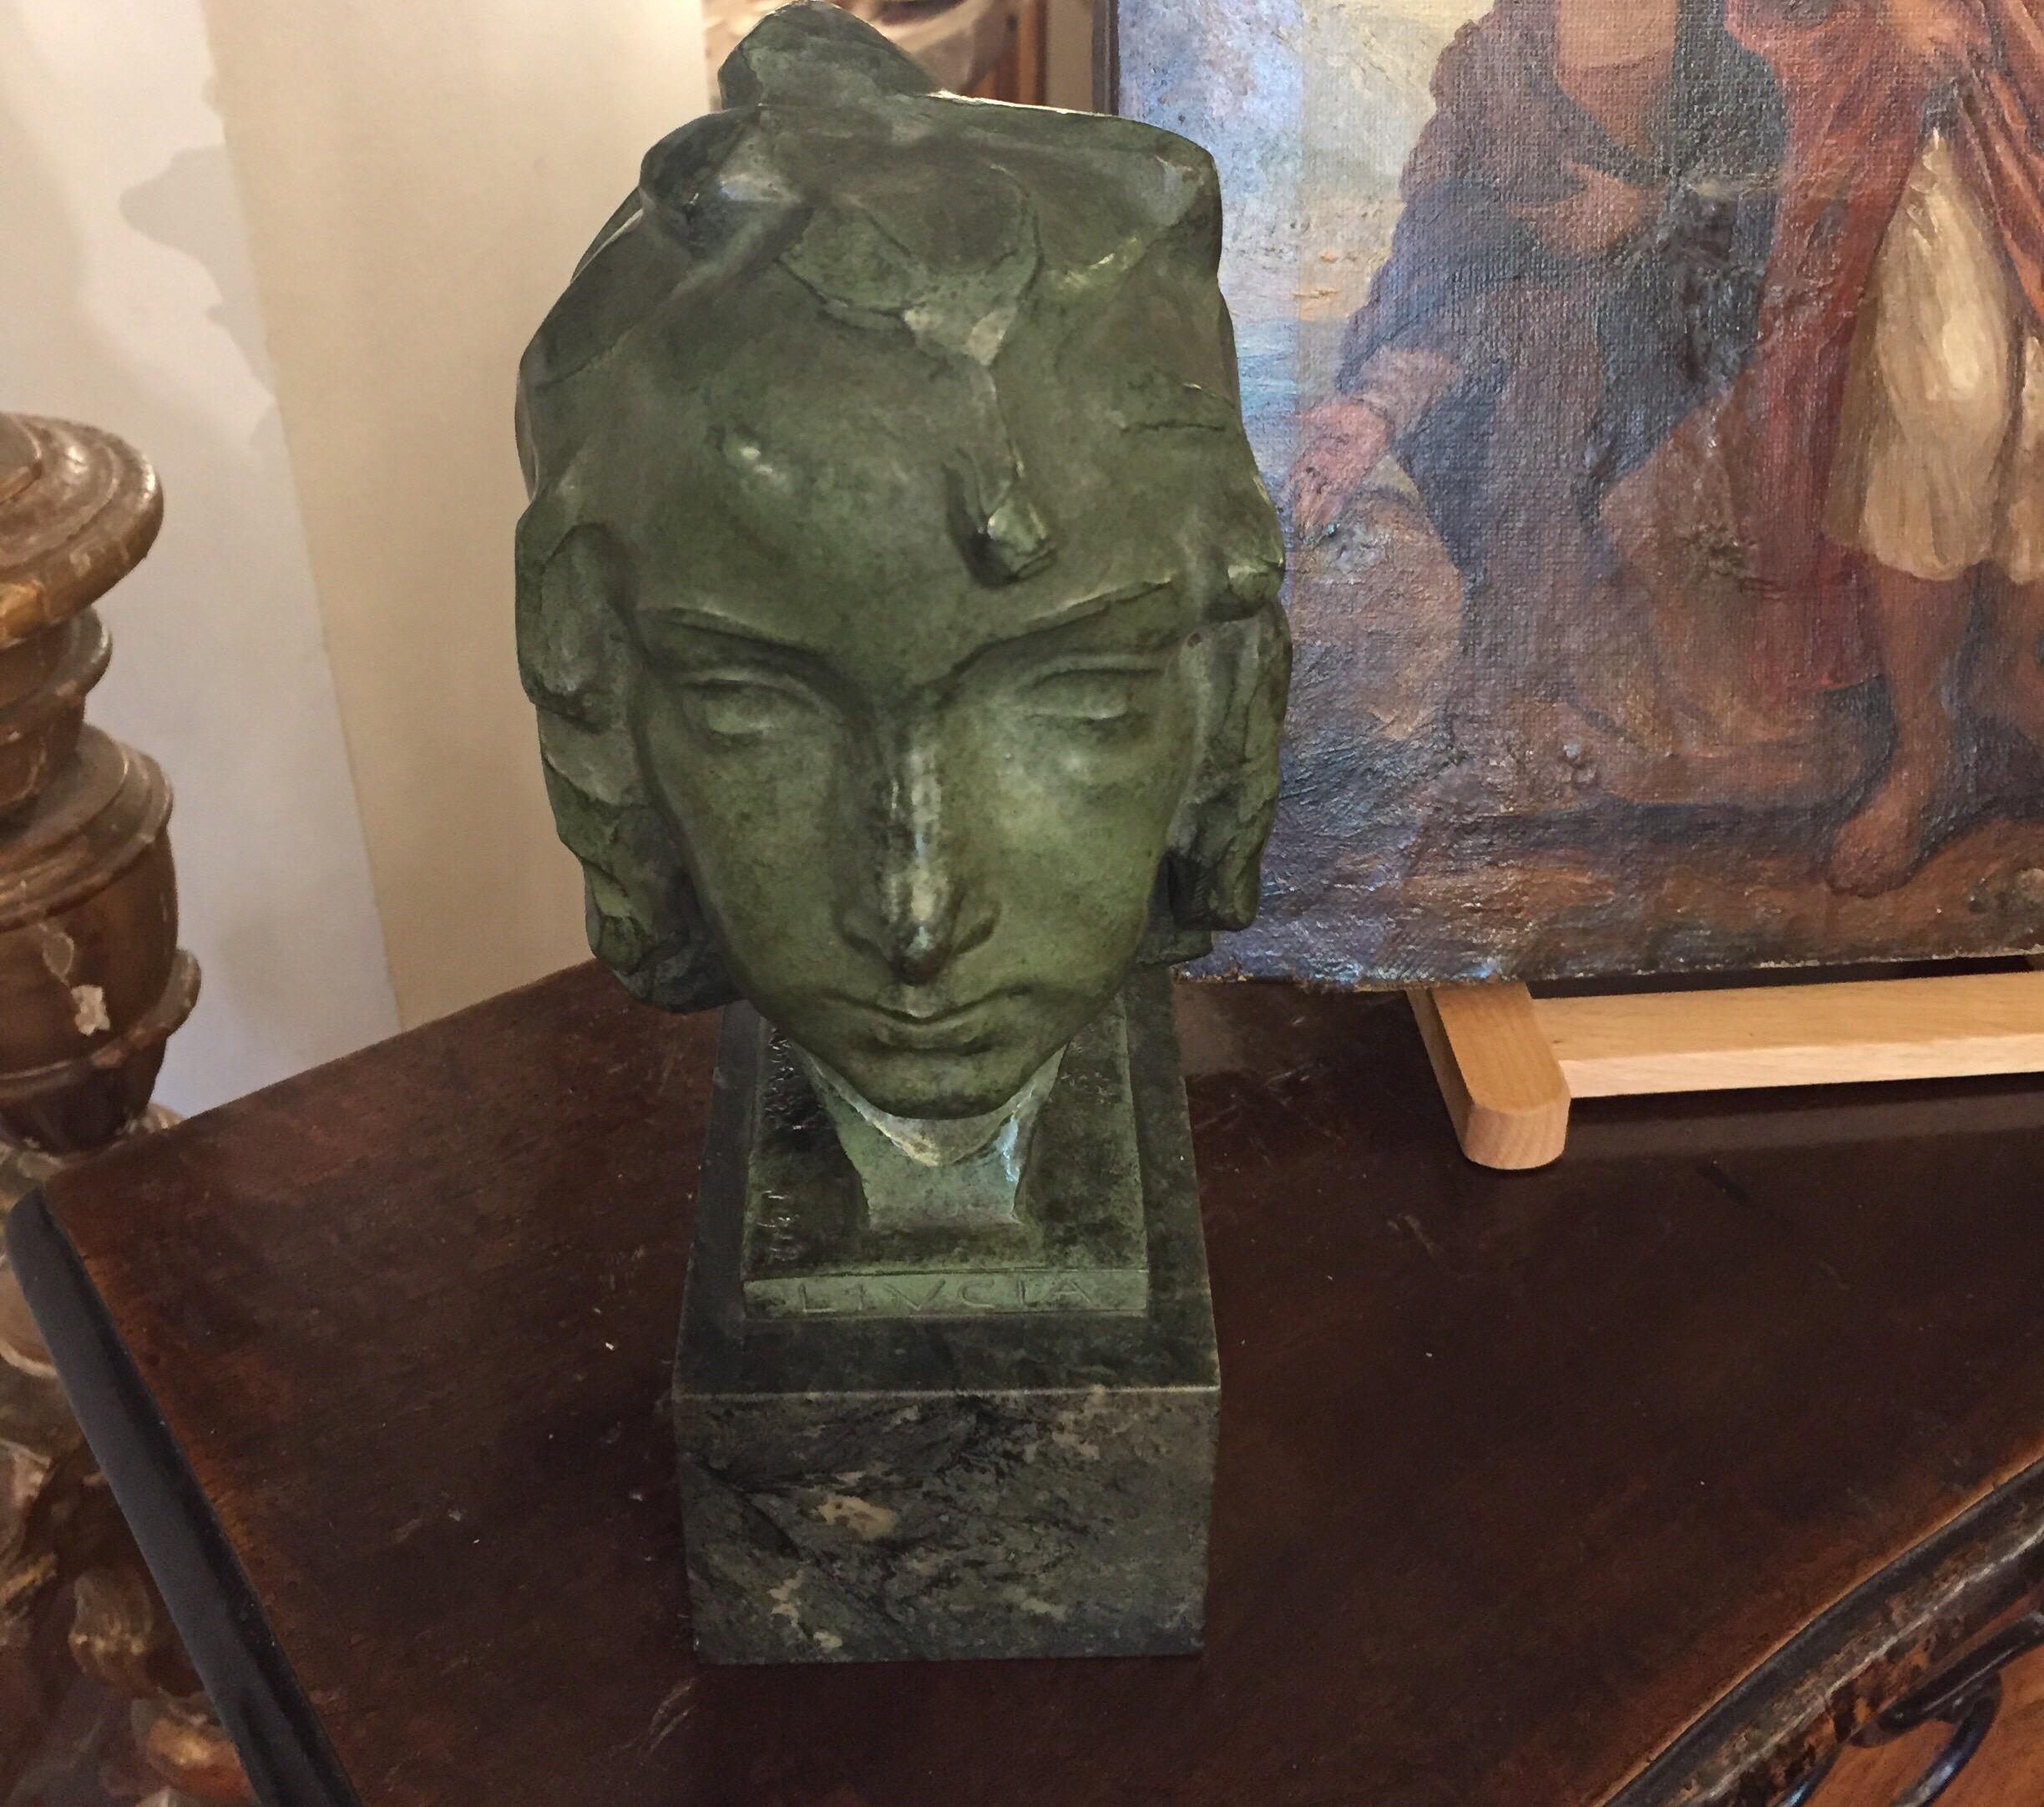 LUCIA, a lovely green patina bronze casting figurative sculpture of a girls's head with waving hair, entitled on the bronze base Llucia, standing on a green marble basement.
This antique Italian bronze sculpture is signed, entitled and dated